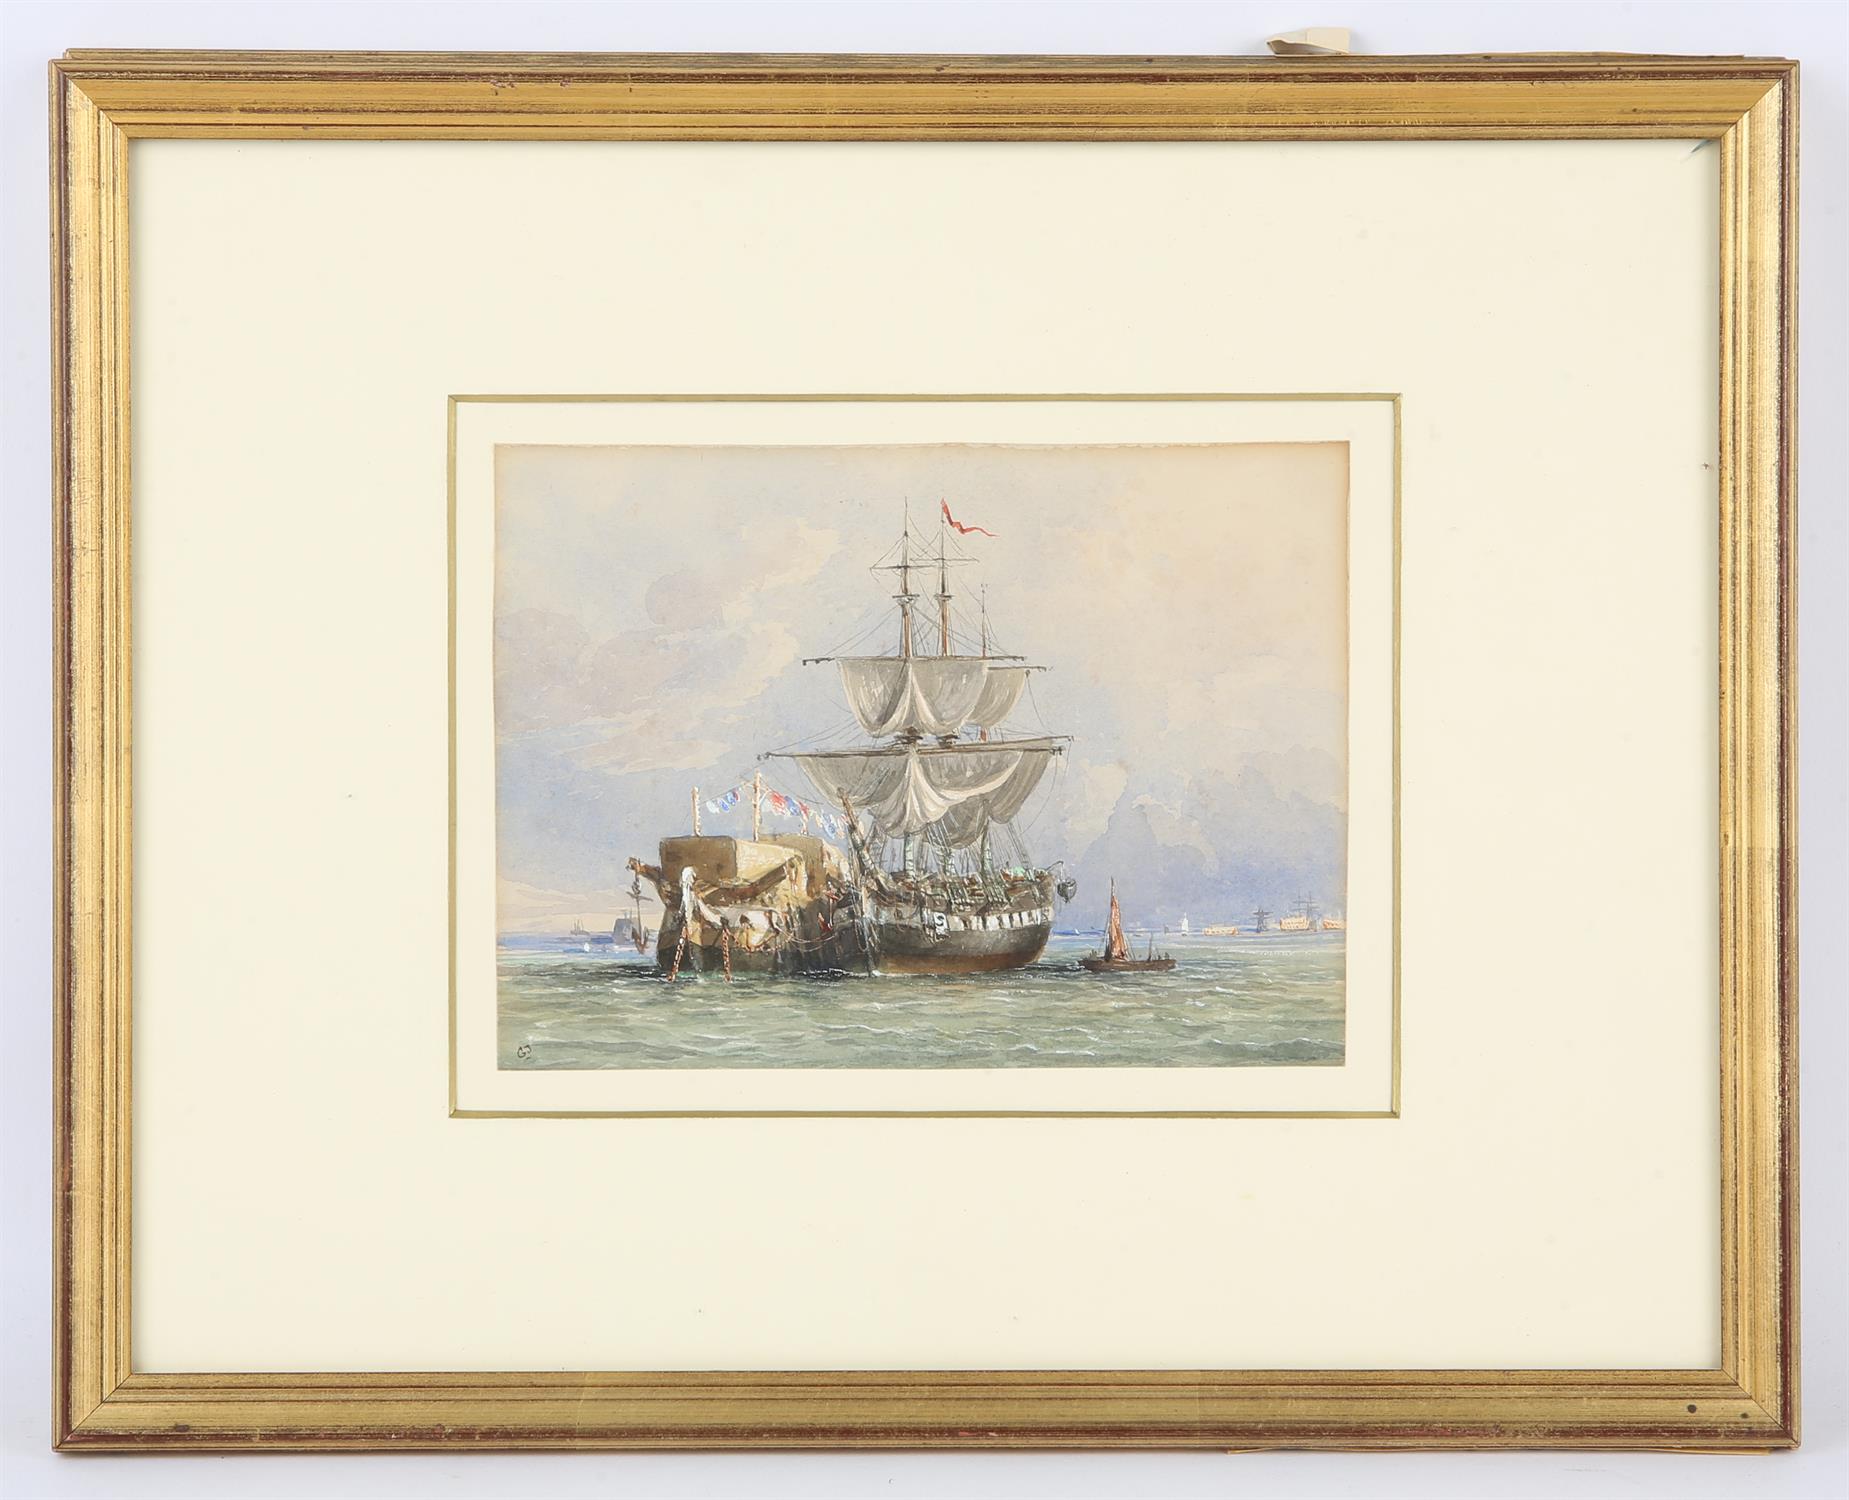 George Jackson (1816-1876), 'Timber ships at Portsmouth Harbour', watercolour, unsigned, 15.